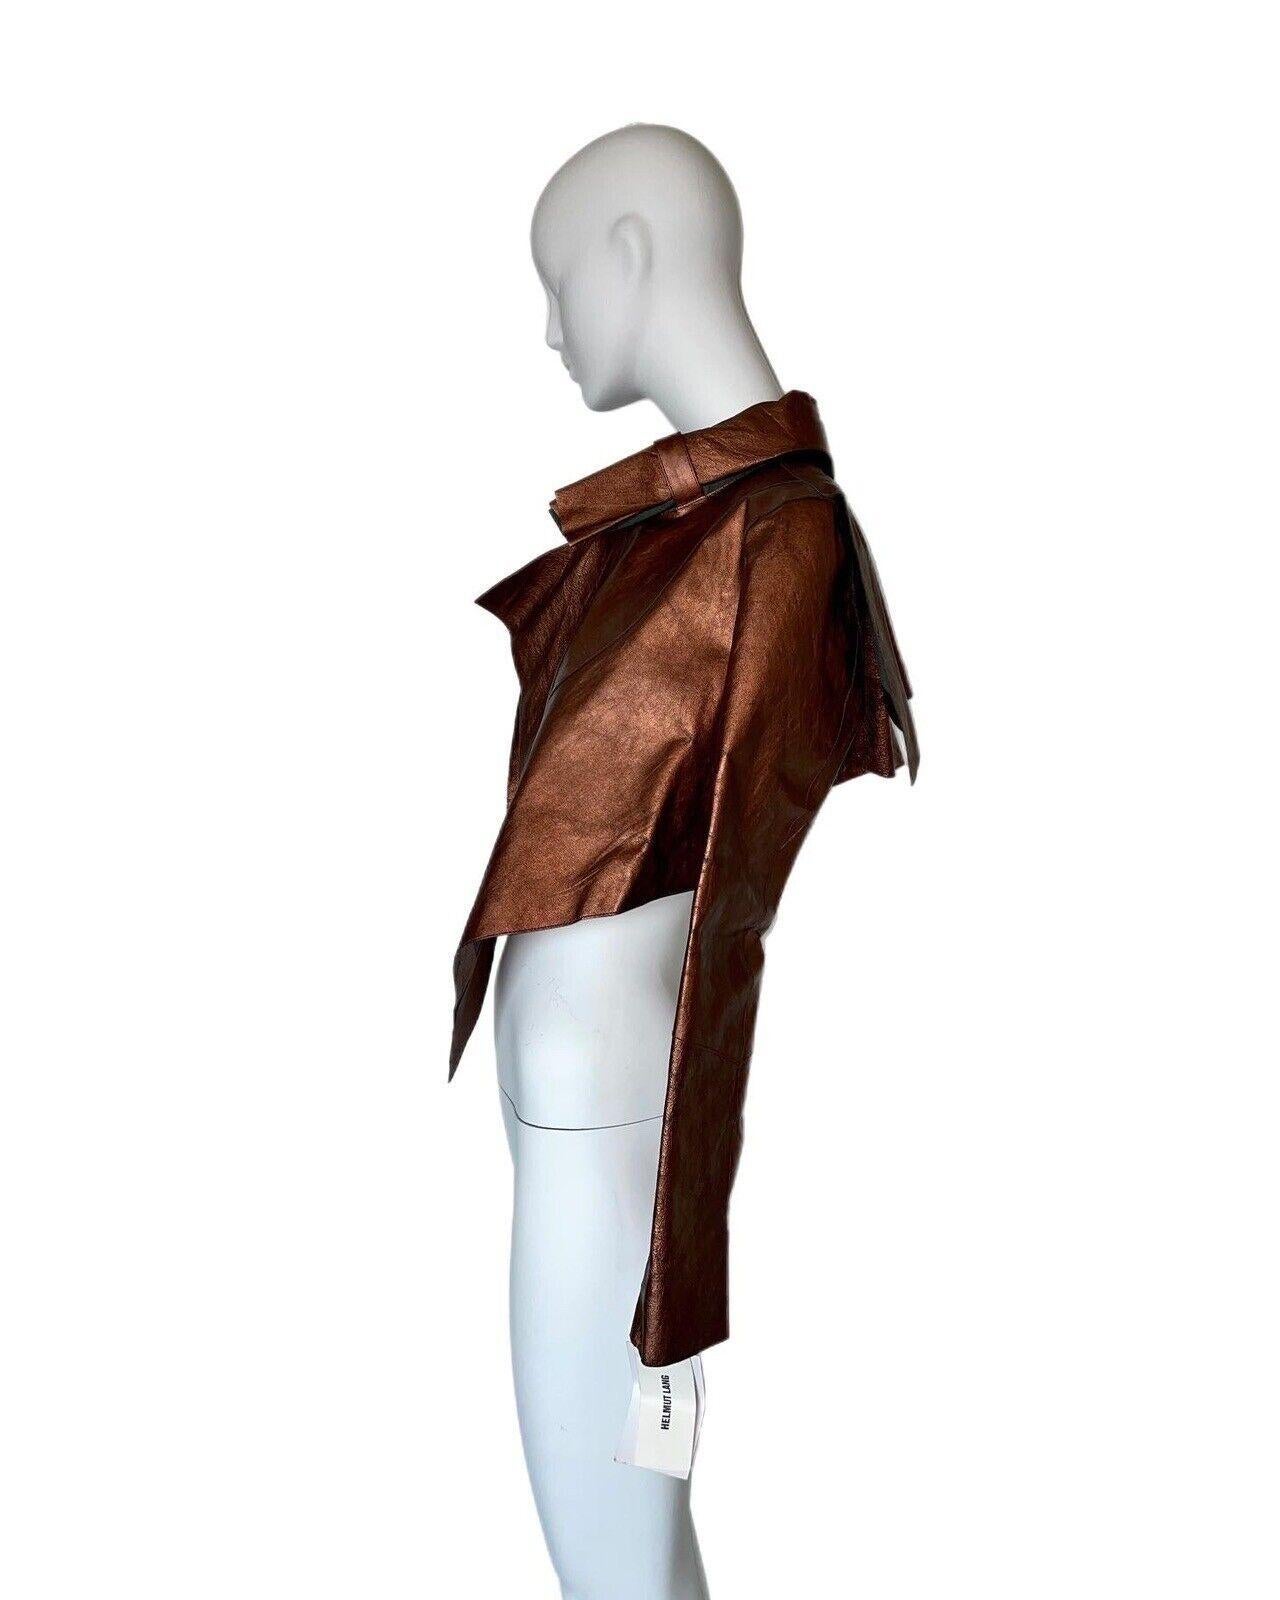 HELMUT LANG 2004 Runway Vintage cropped bronze leather jacket In New Condition For Sale In Leonardo, NJ